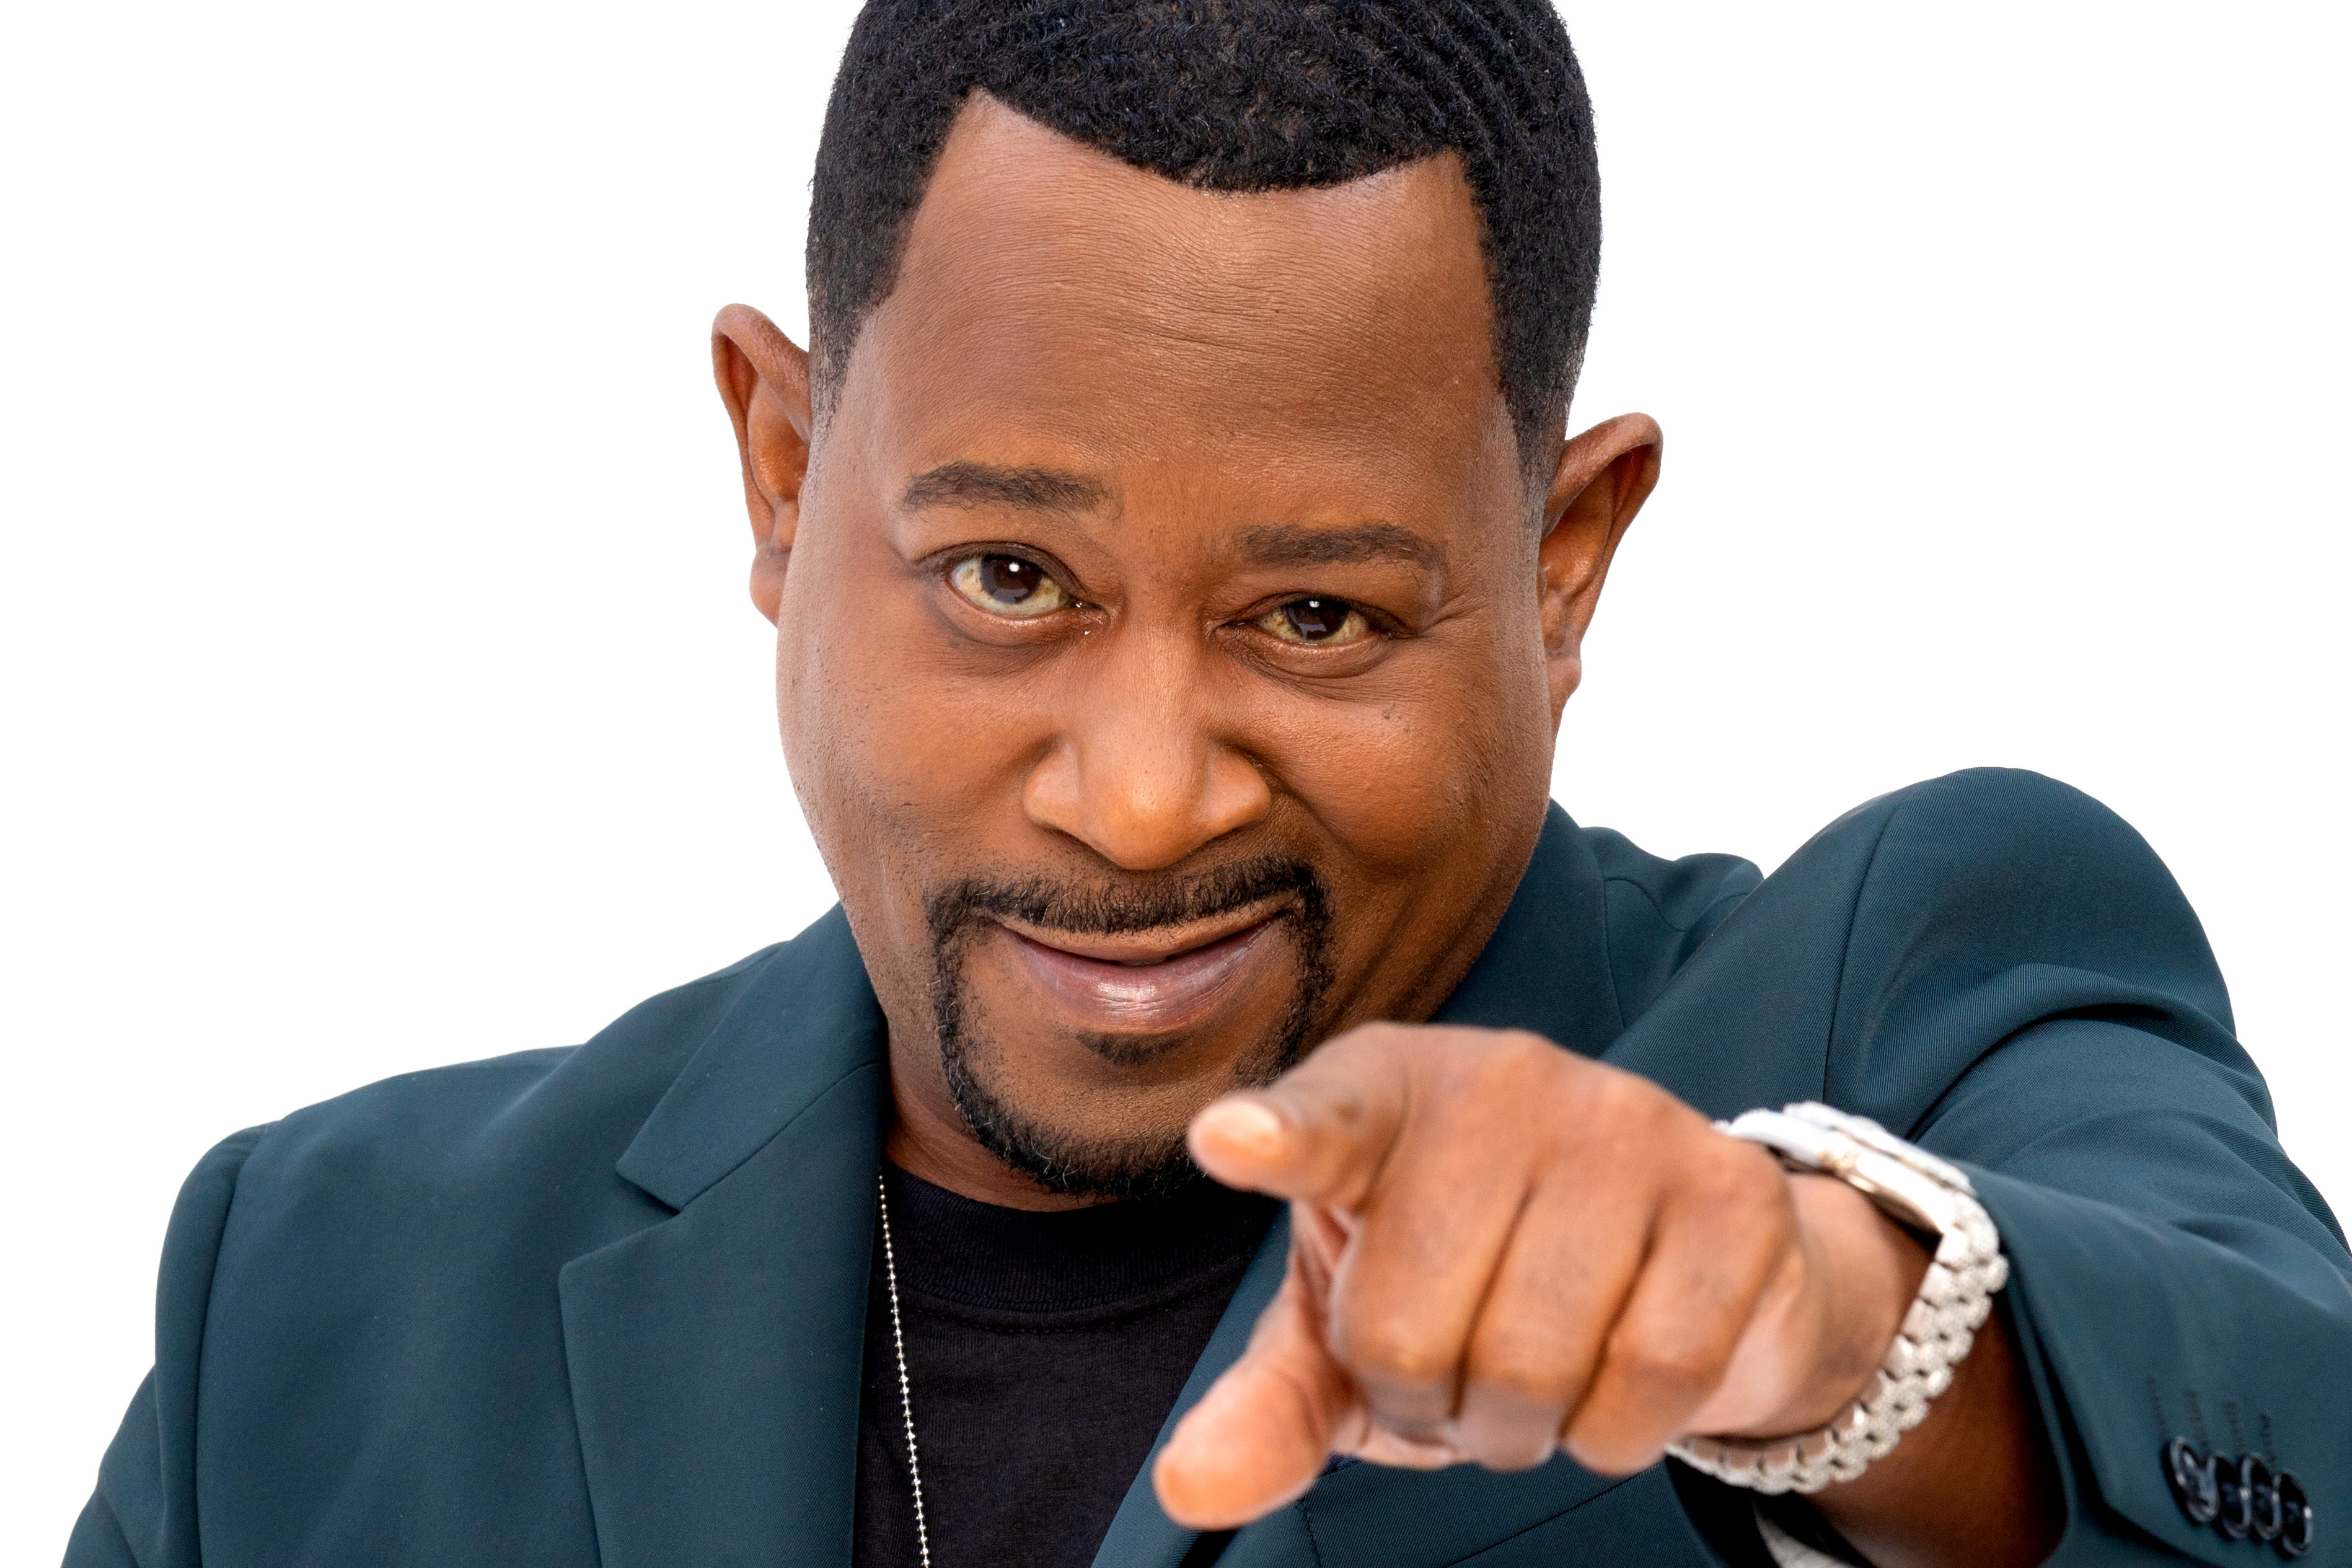 'Guess who's back!' Martin Lawrence announces his first comedy tour in eight years